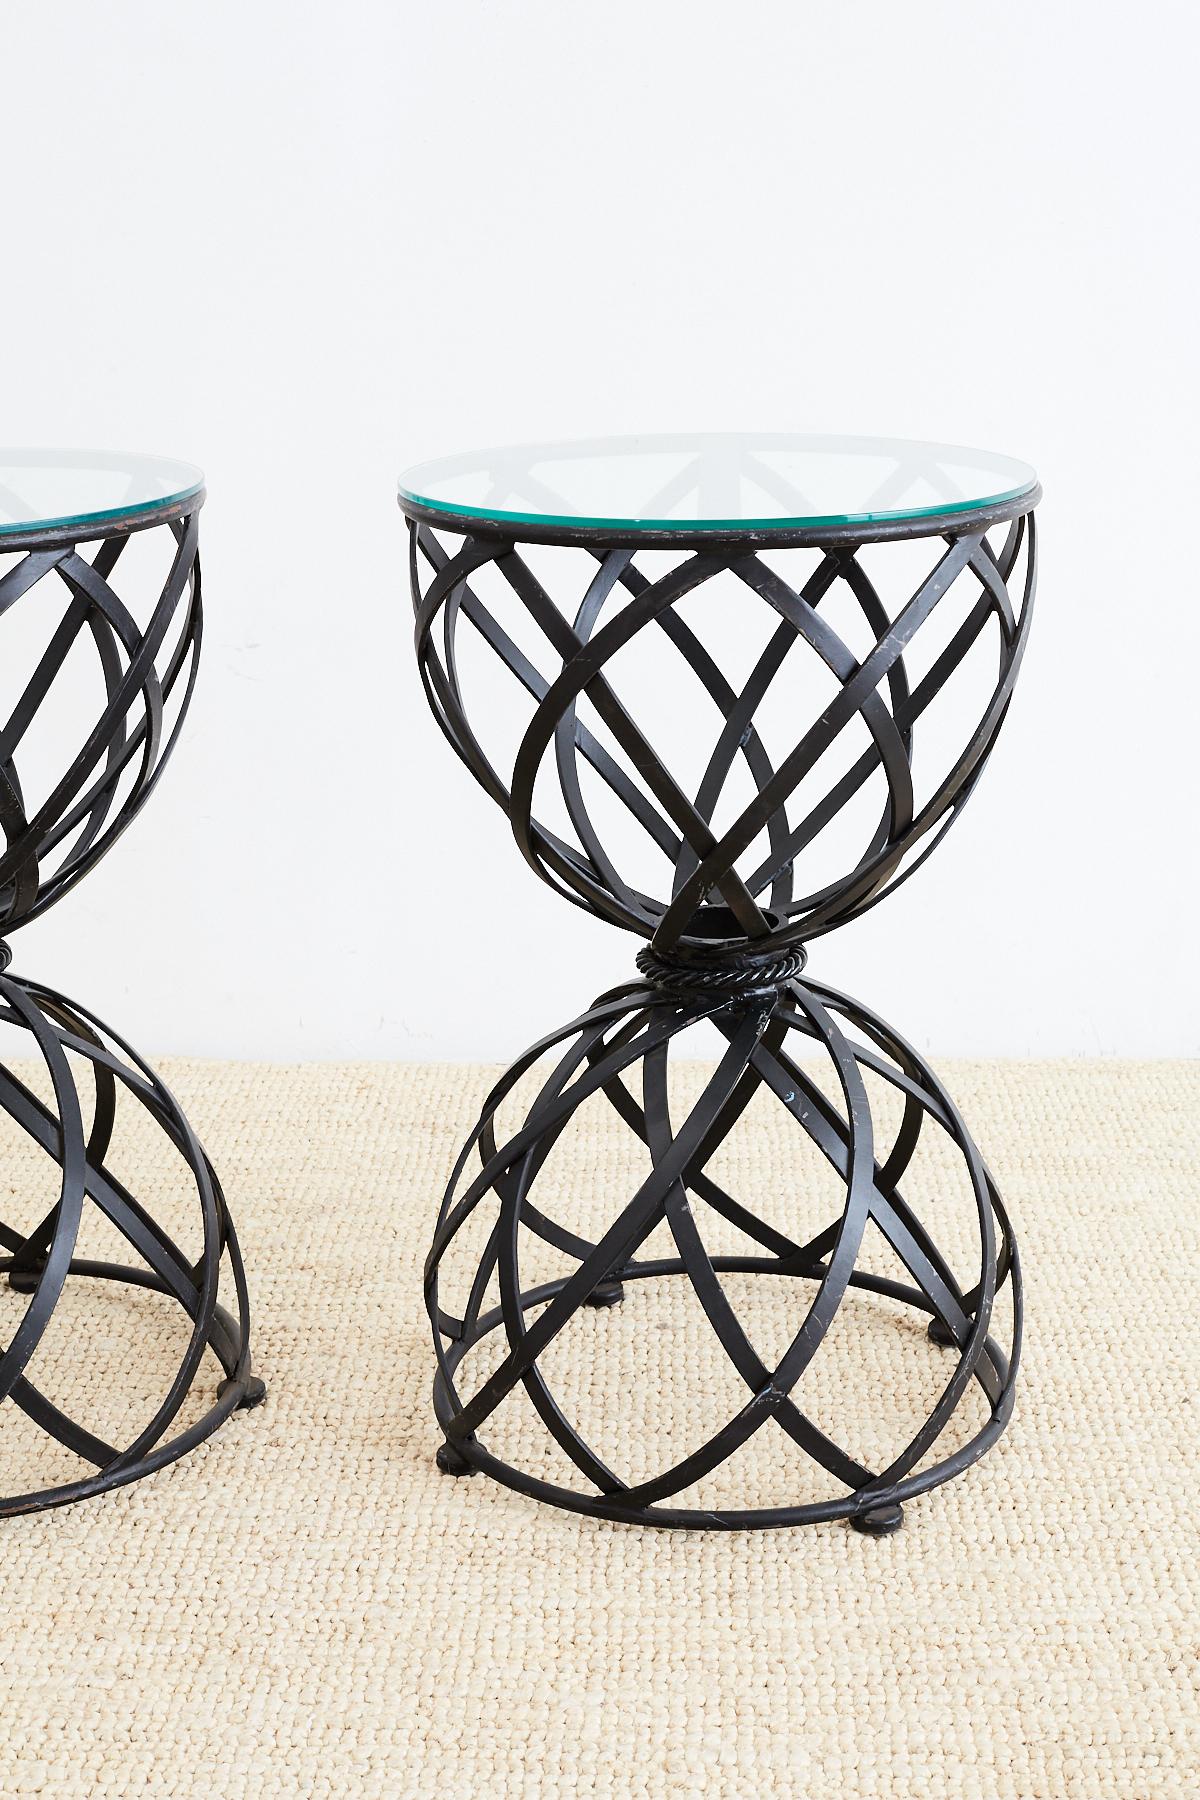 Wrought Iron Pair of Woven Iron Basket Design Drinks Tables